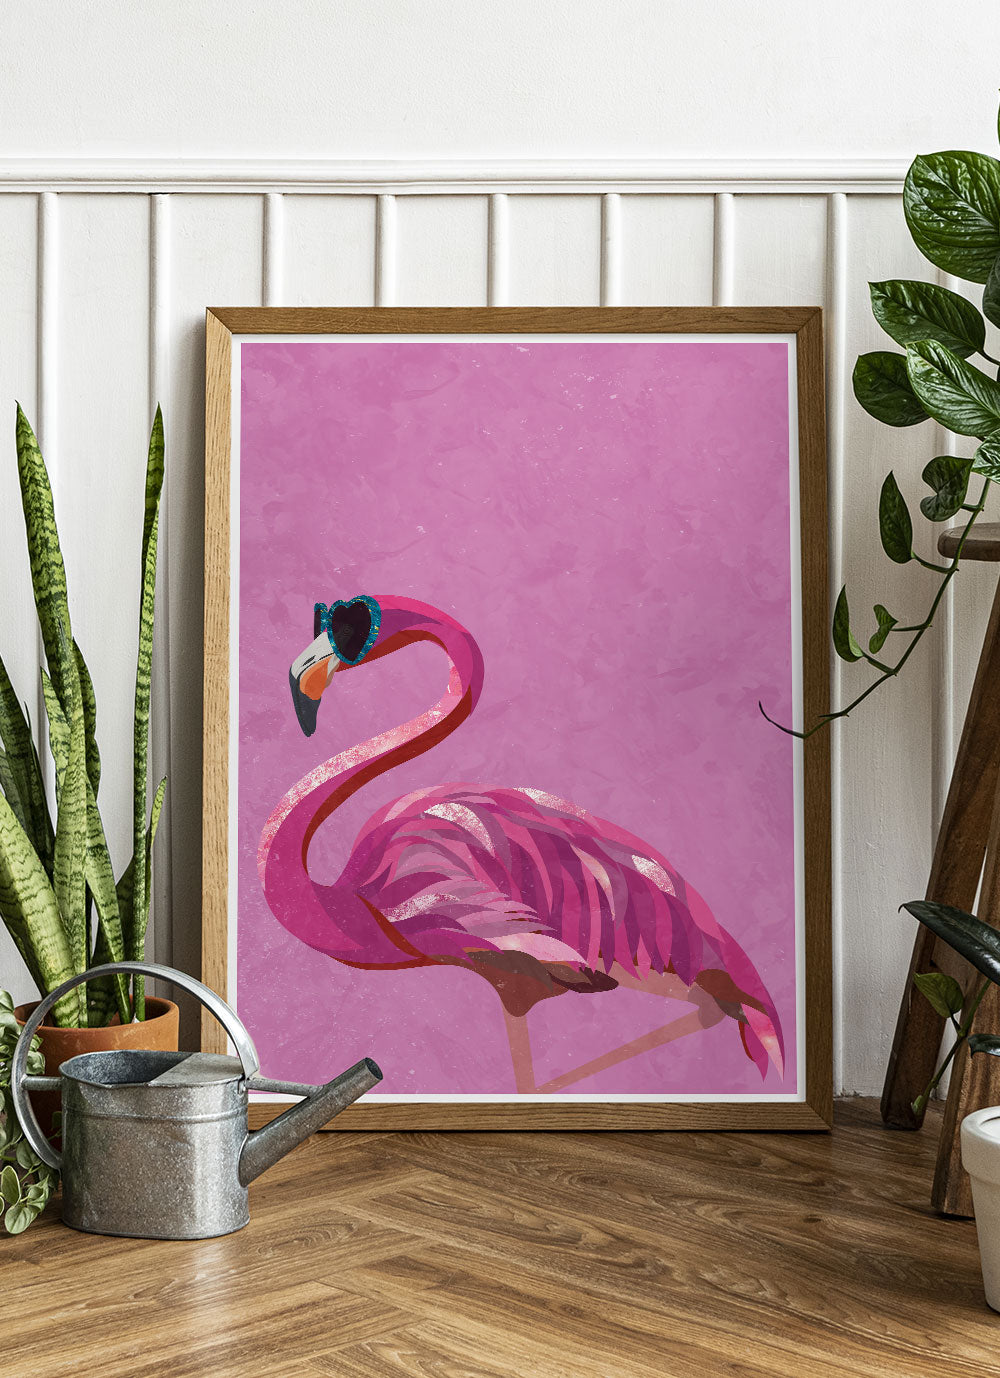 Funky Flamingo Art Print by Sarah Manovski in a clean room with house plants